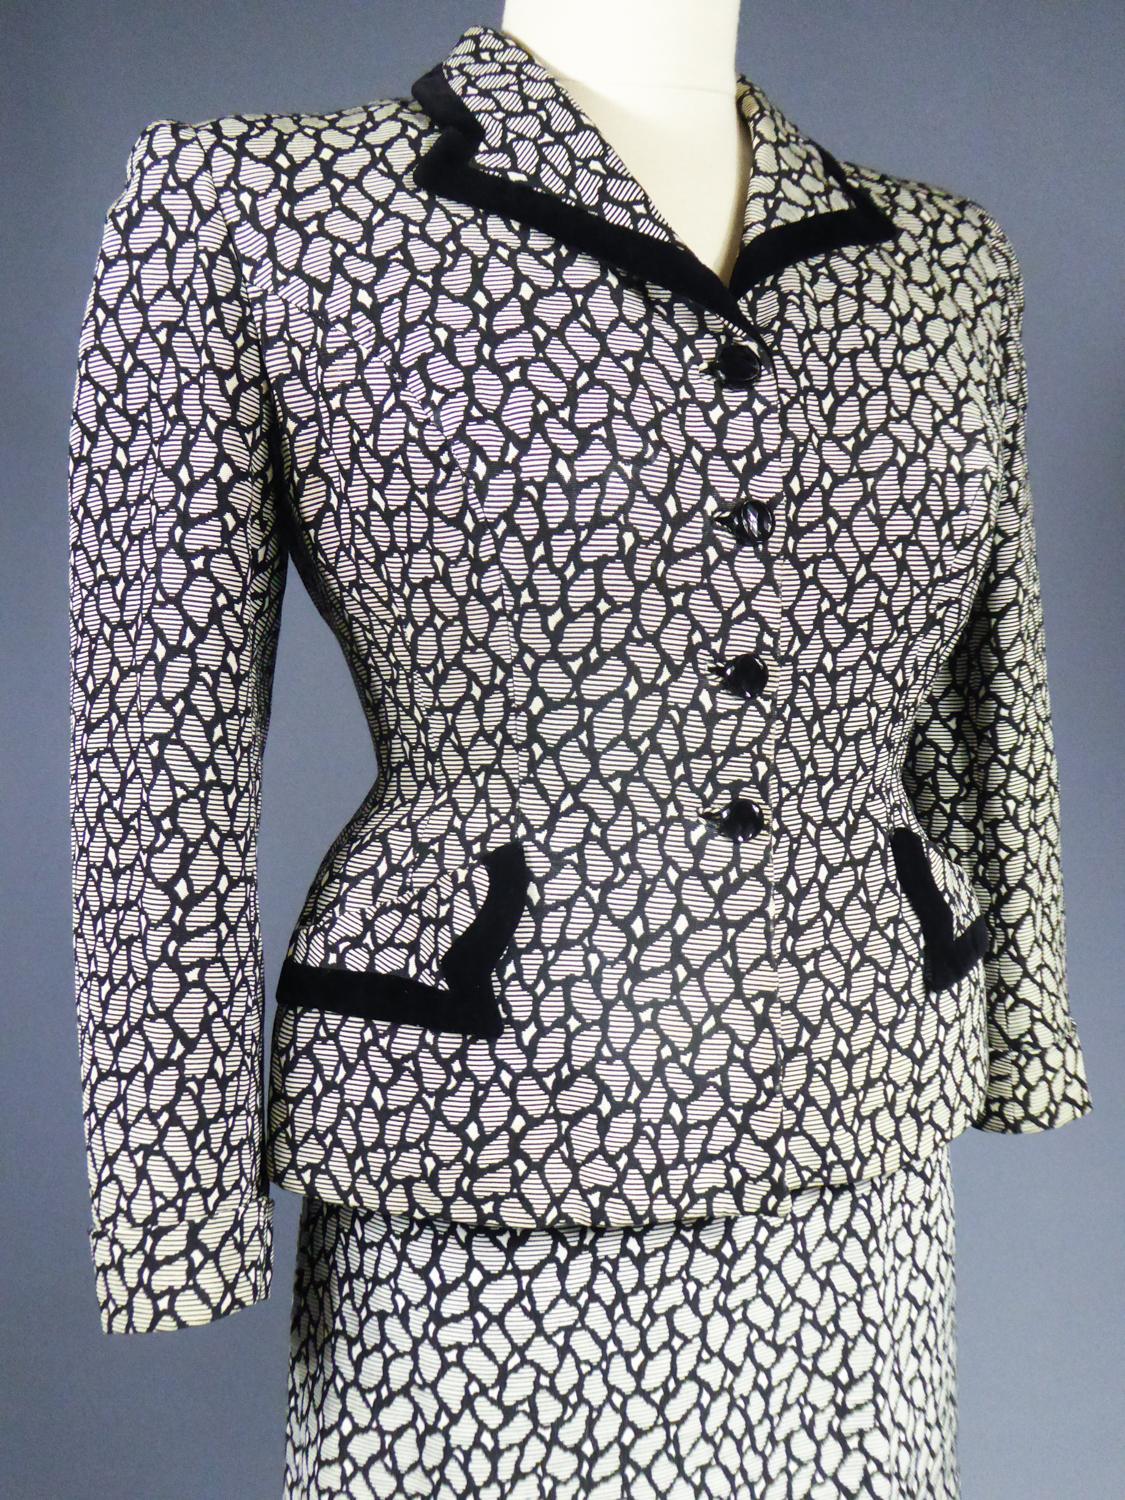 Circa 1945/1950
France

Rare Bar and Couture skirt suit in façonné with artificial fibers dating from the years 1945/1950, in line with the New Look by Christian Dior. Interesting black and white façonné fabric with random honeycomb patterns.